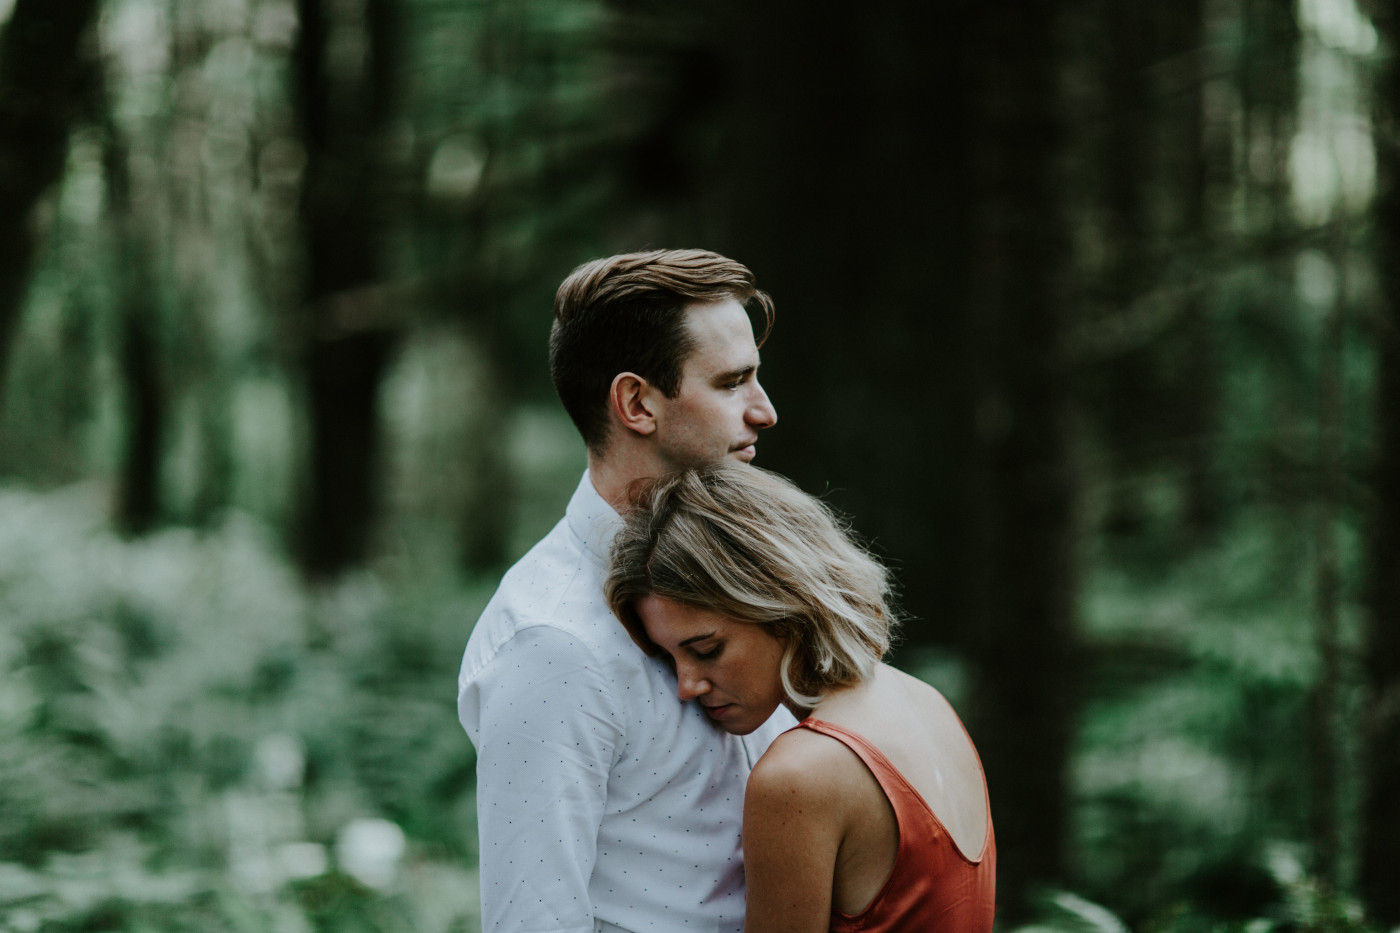 Chelsey rests her head on Billy's chest. Elopement wedding photography at Cannon Beach by Sienna Plus Josh.